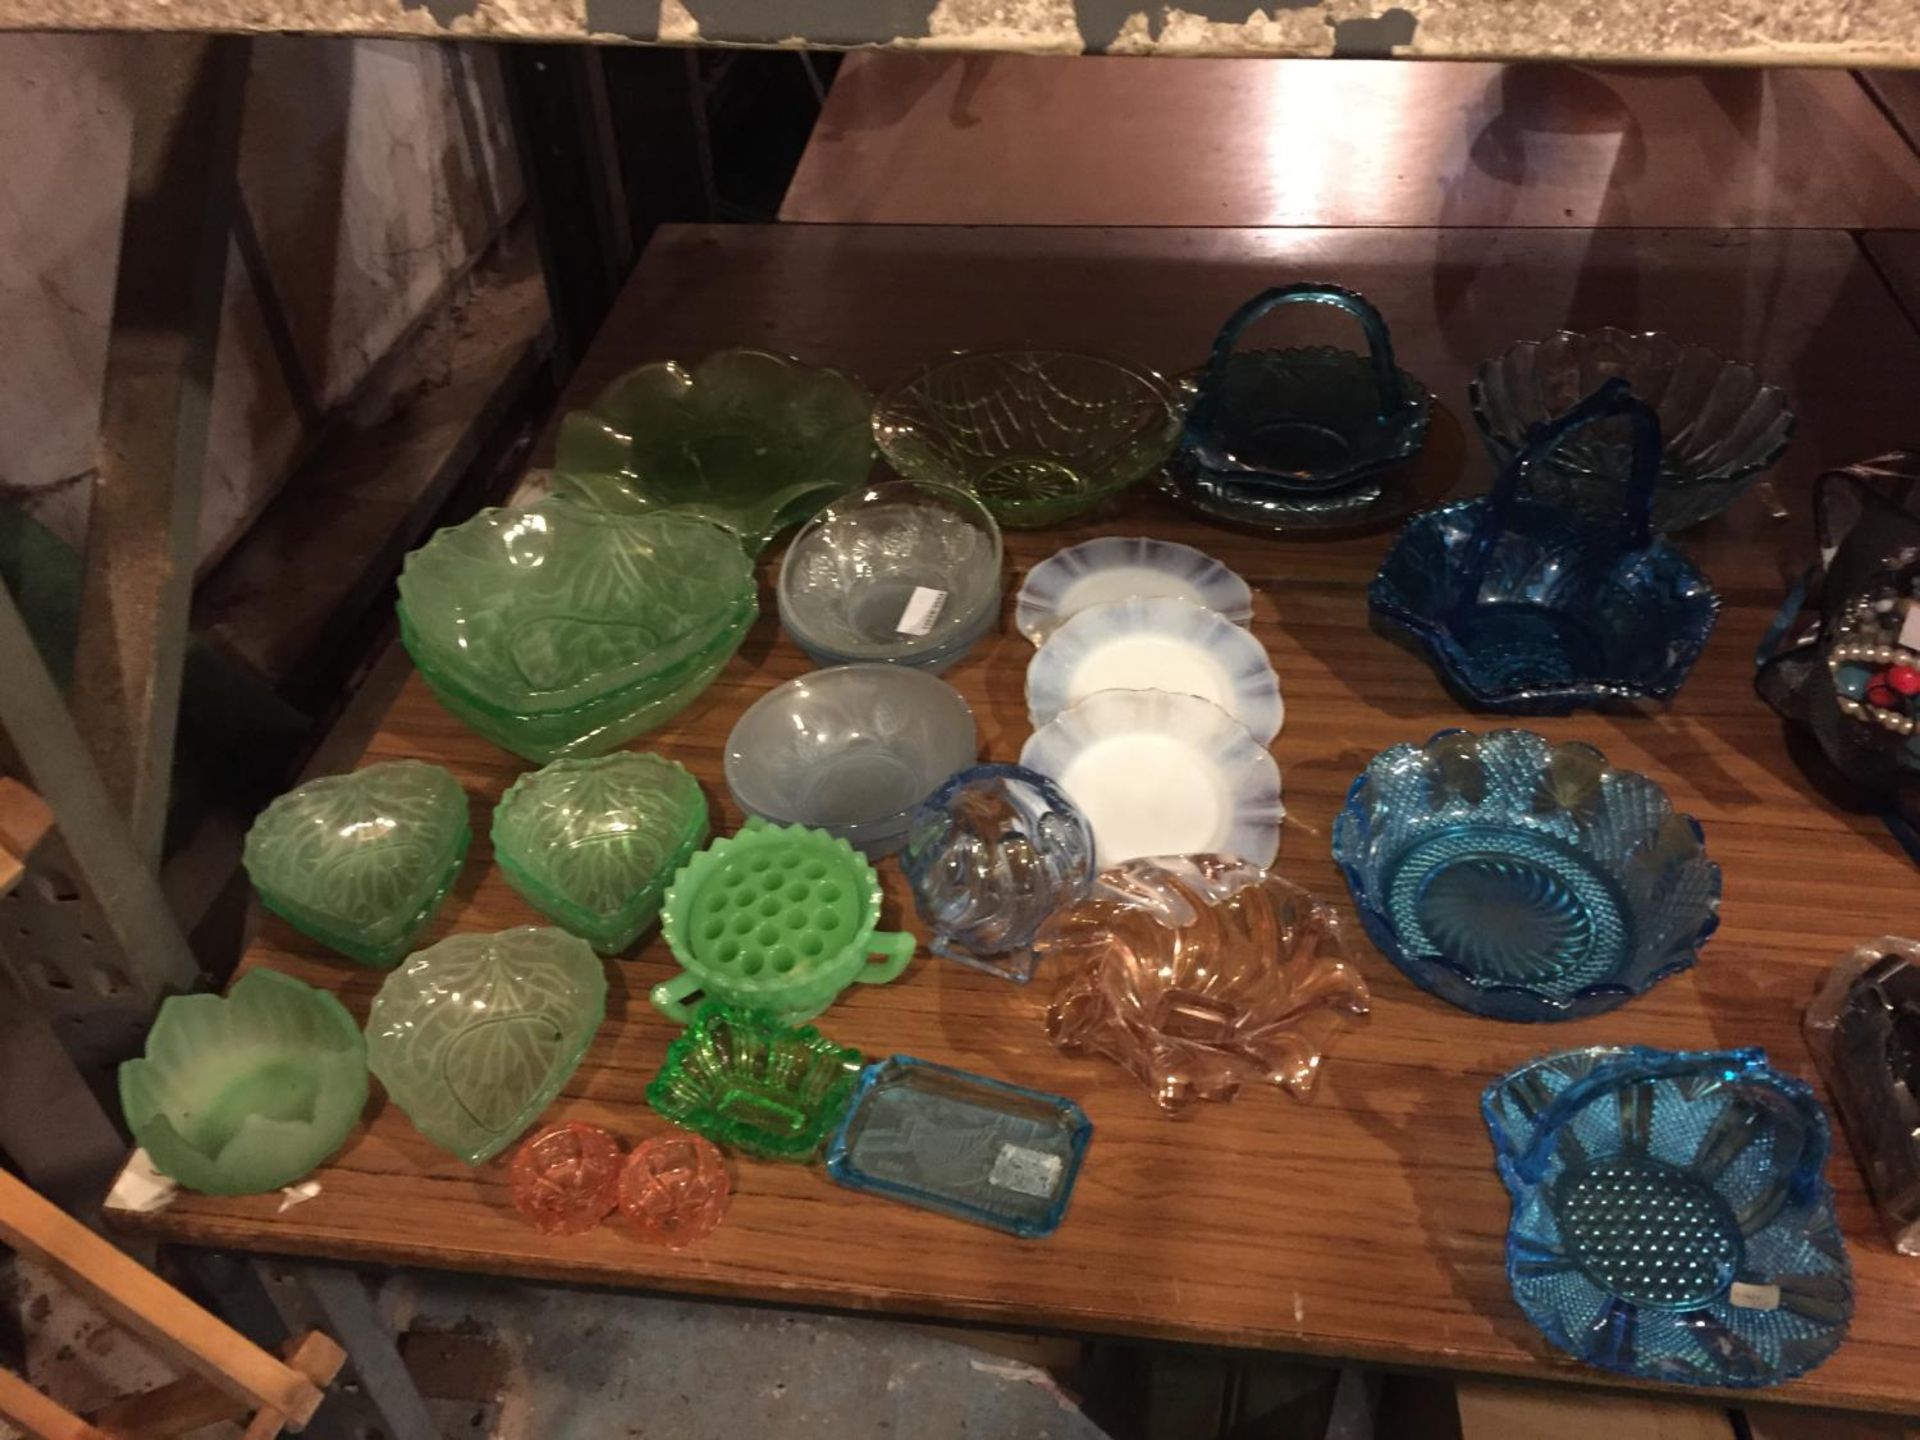 A LARGE AMOUNT OF GLASSWARE TO INCLUDE LEAF SHAPED GREEN BOWLS, BLUE BASKETS, PLATES, ETC